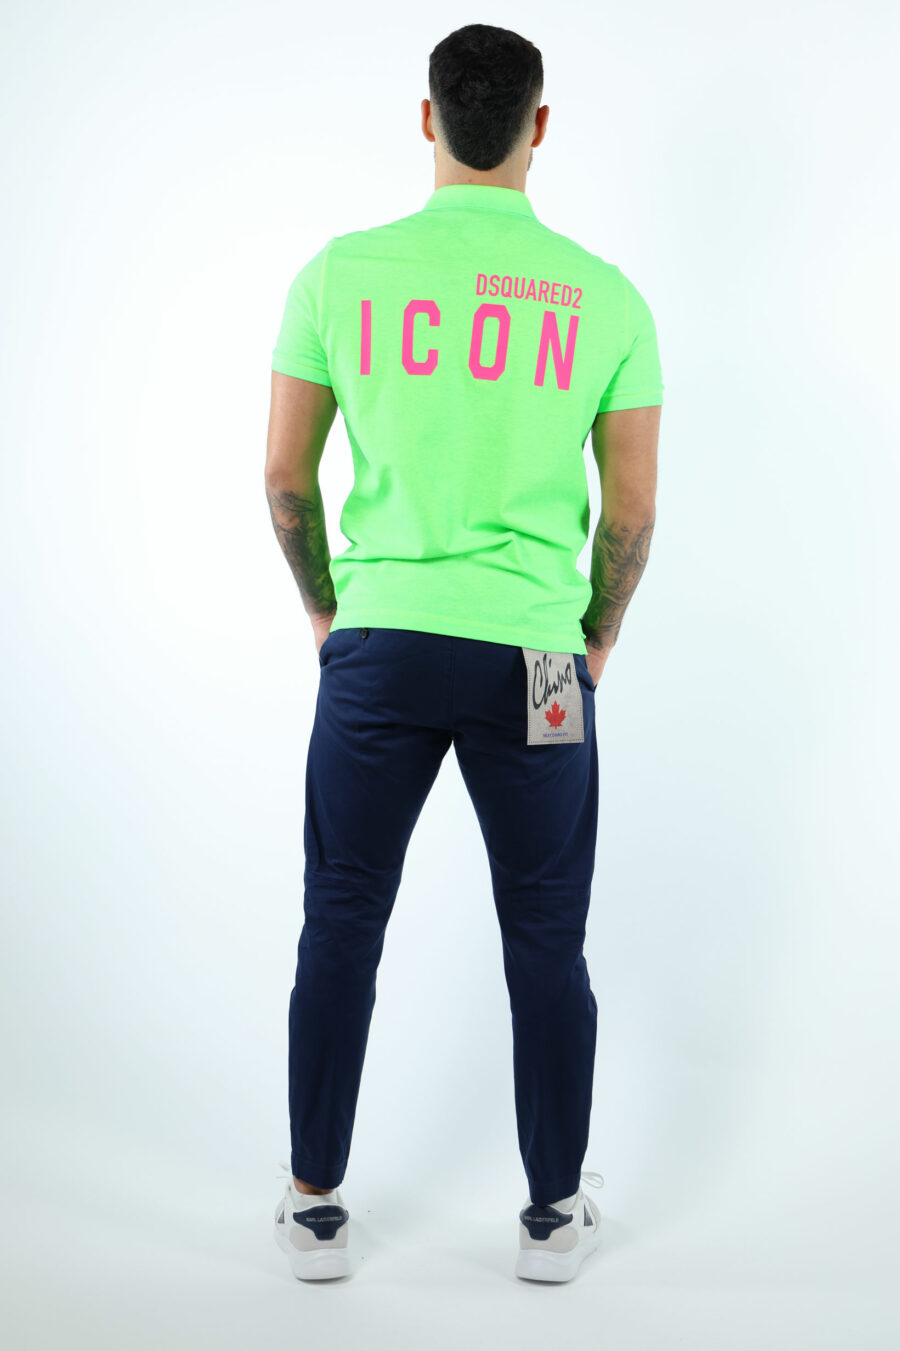 Neon green "tennis fit" polo shirt with "icon" logo on the back - 106700